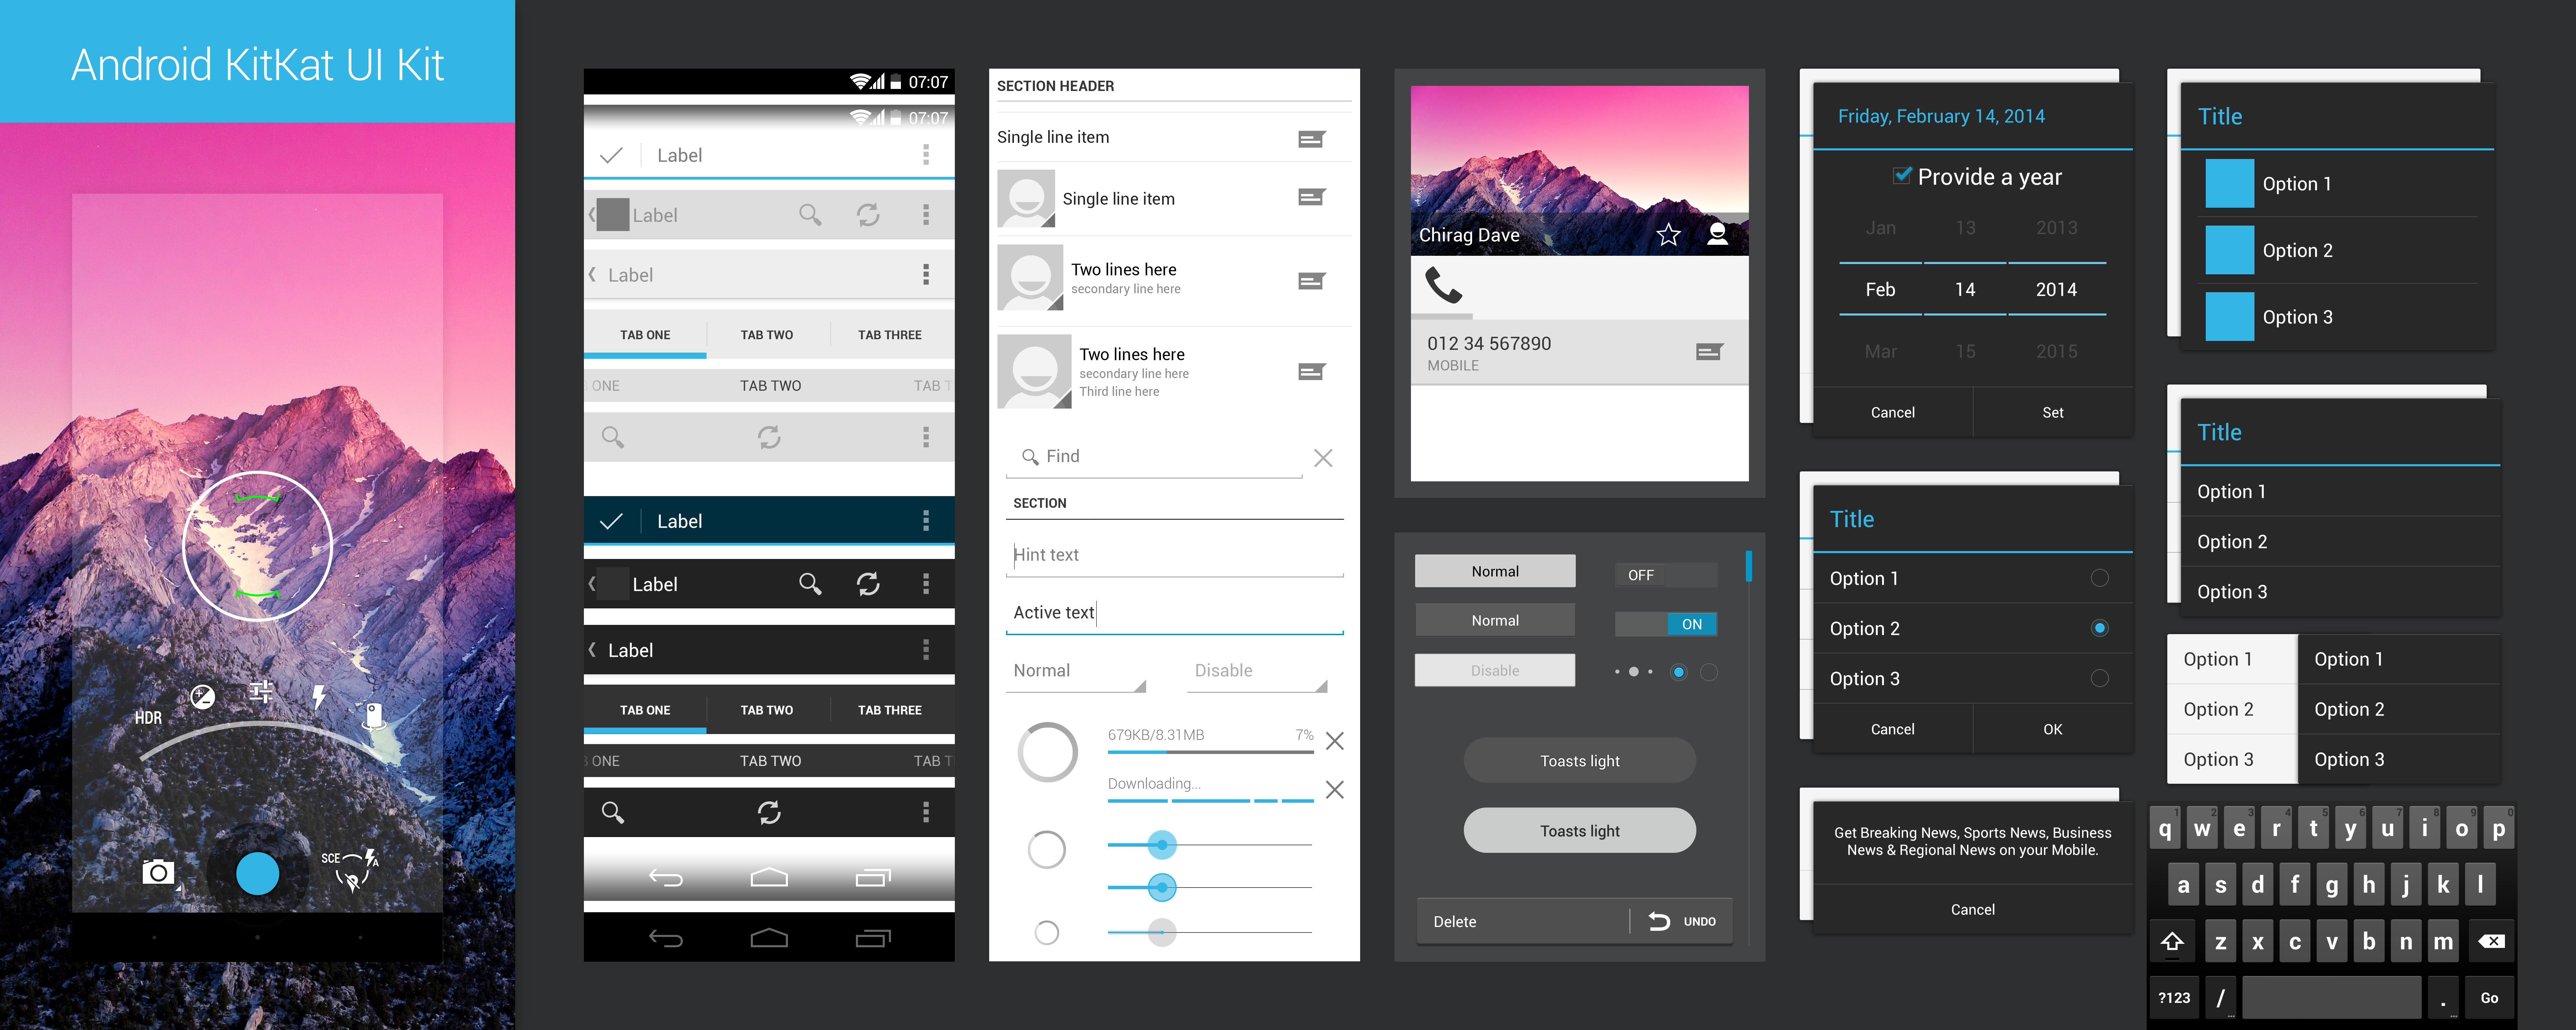 Android Kitkat Ui Kit by Chiragd on Dribbble